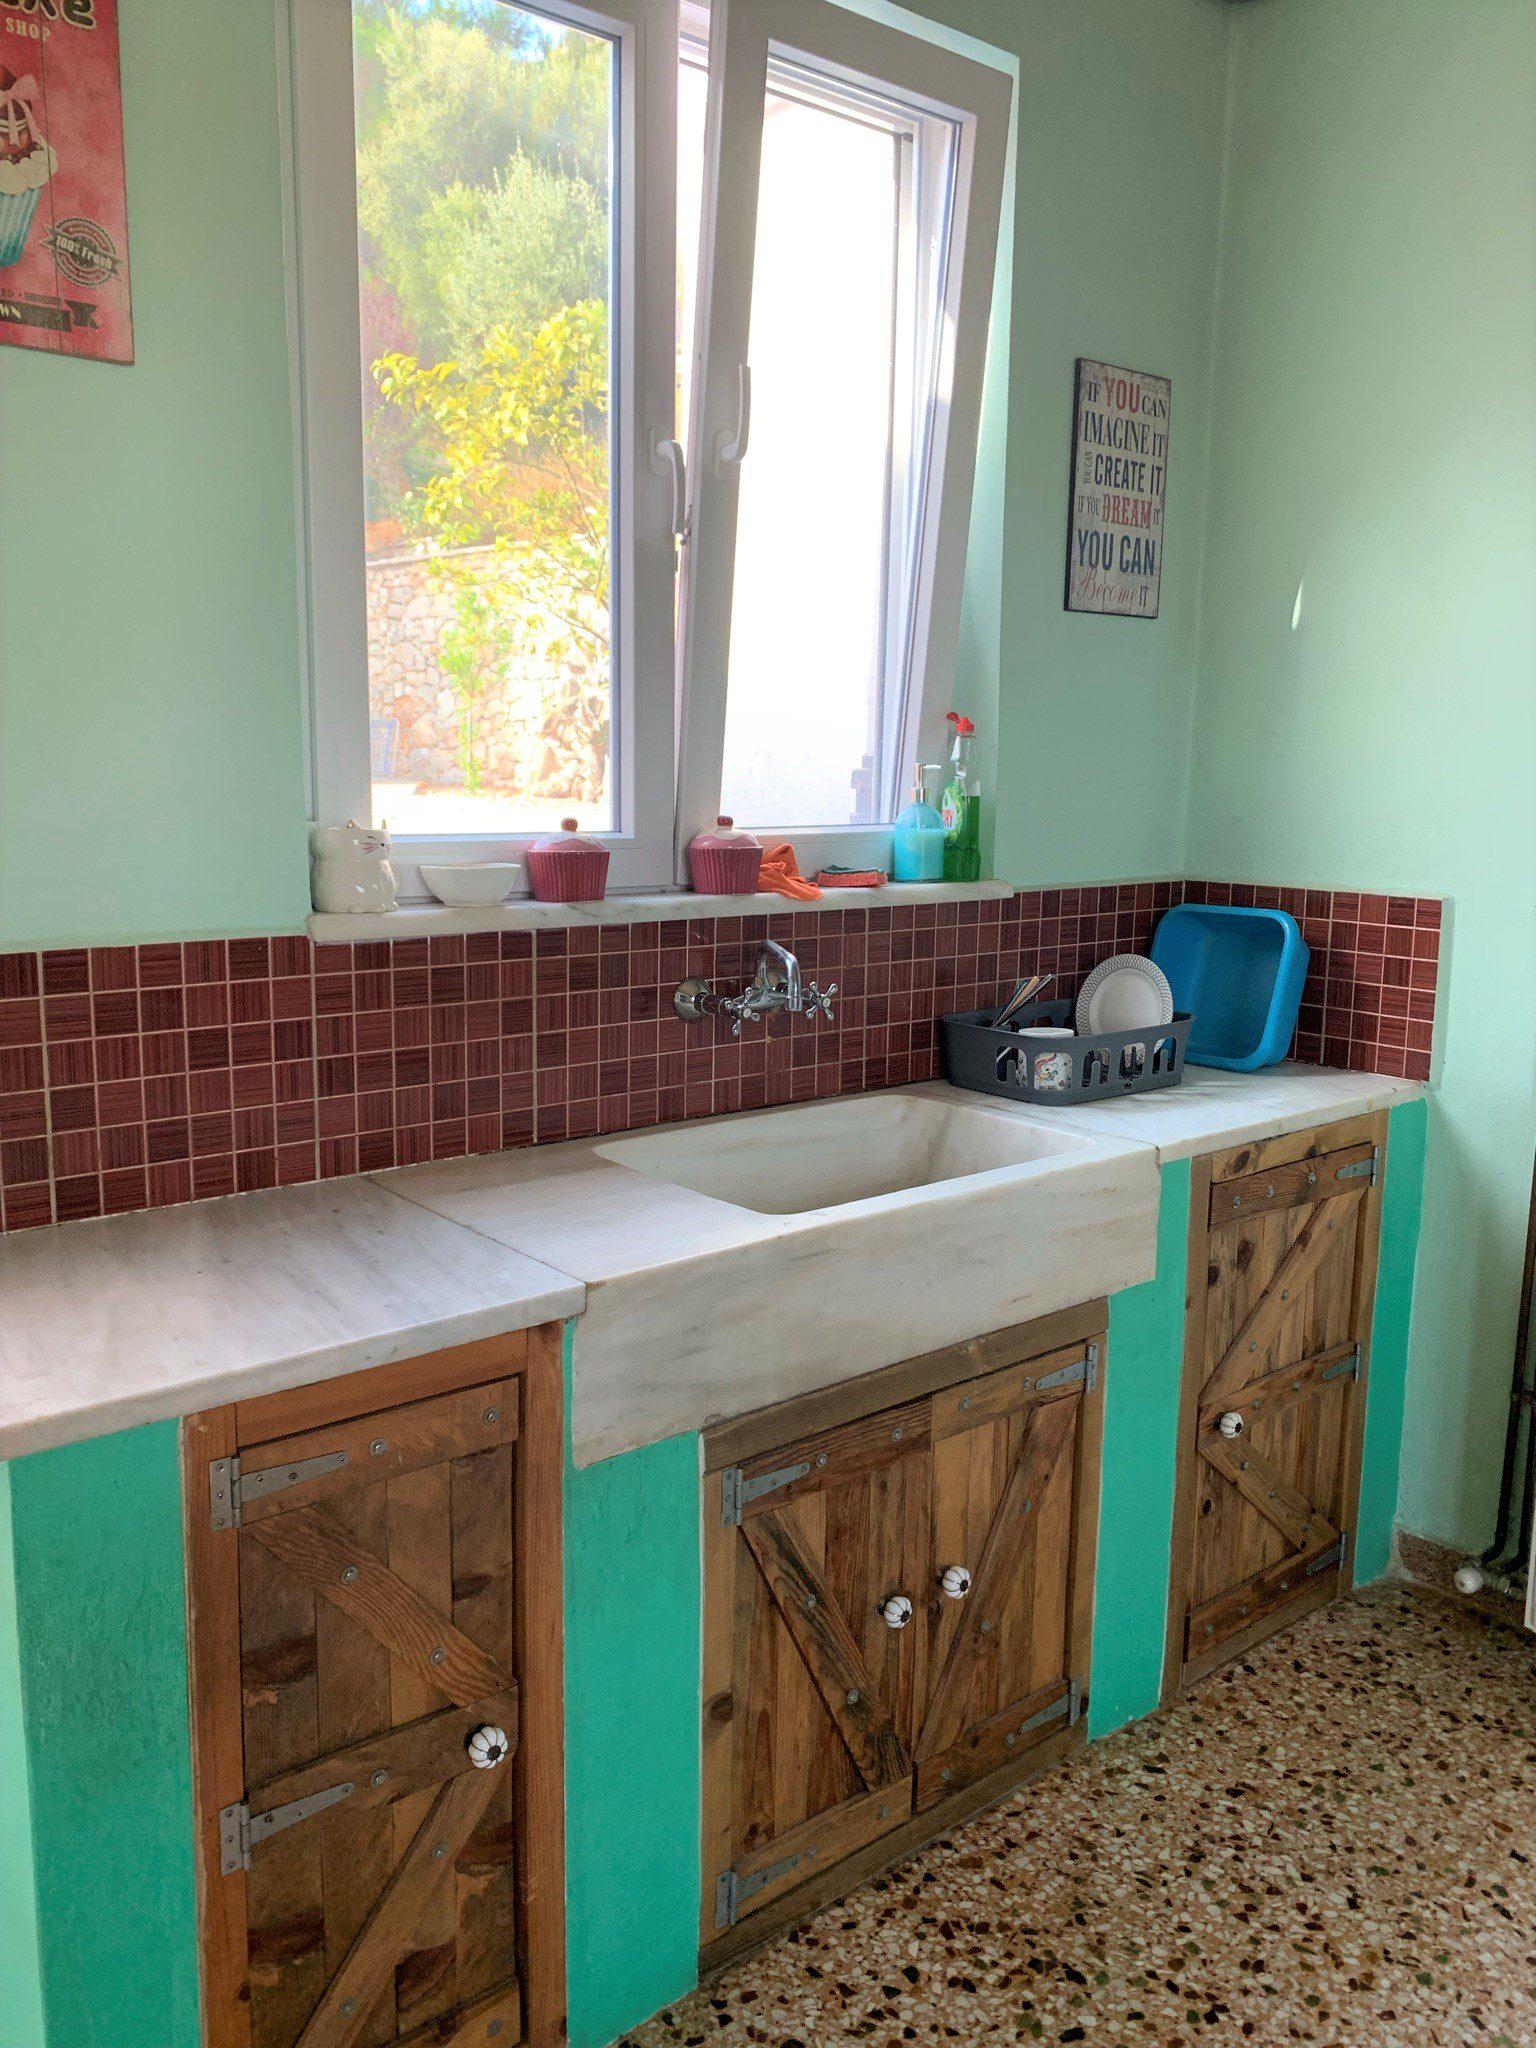 Kitchen of house for sale in Ithaca Greece, Lefki